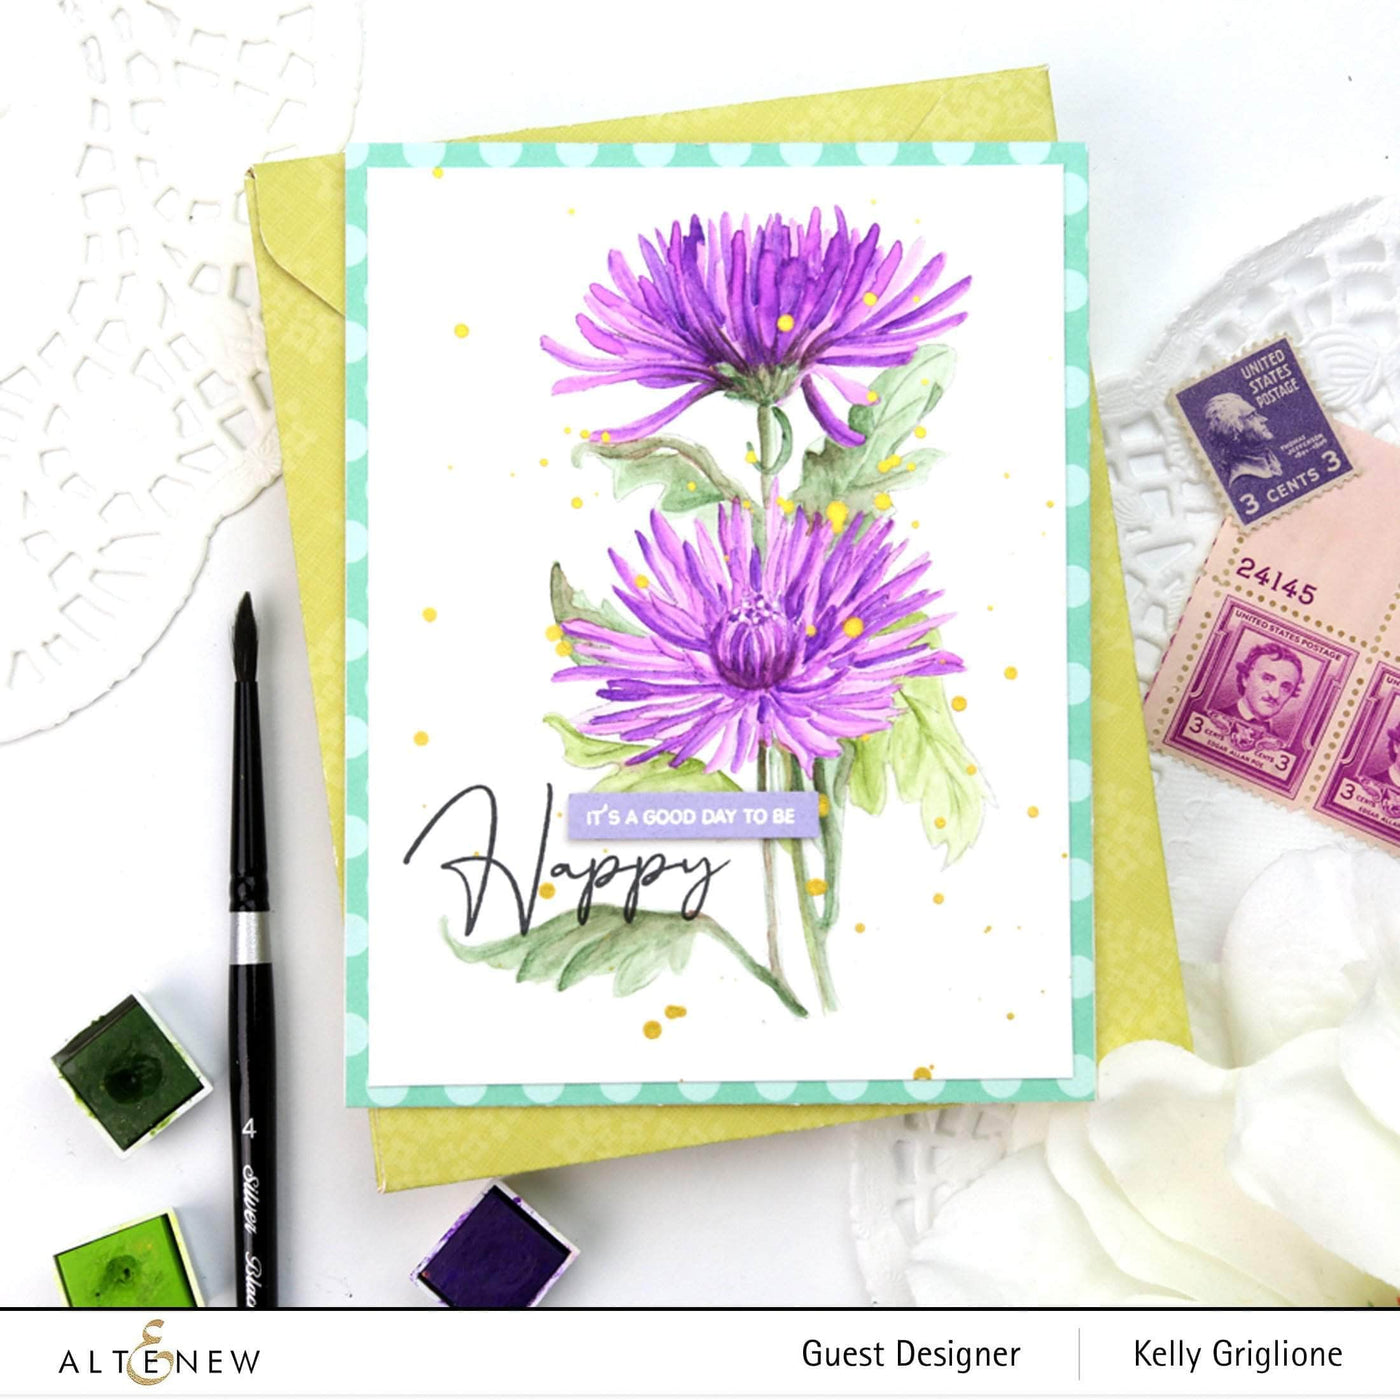 Photocentric Clear Stamps Paint-A-Flower: Spider Mums Outline Stamp Set